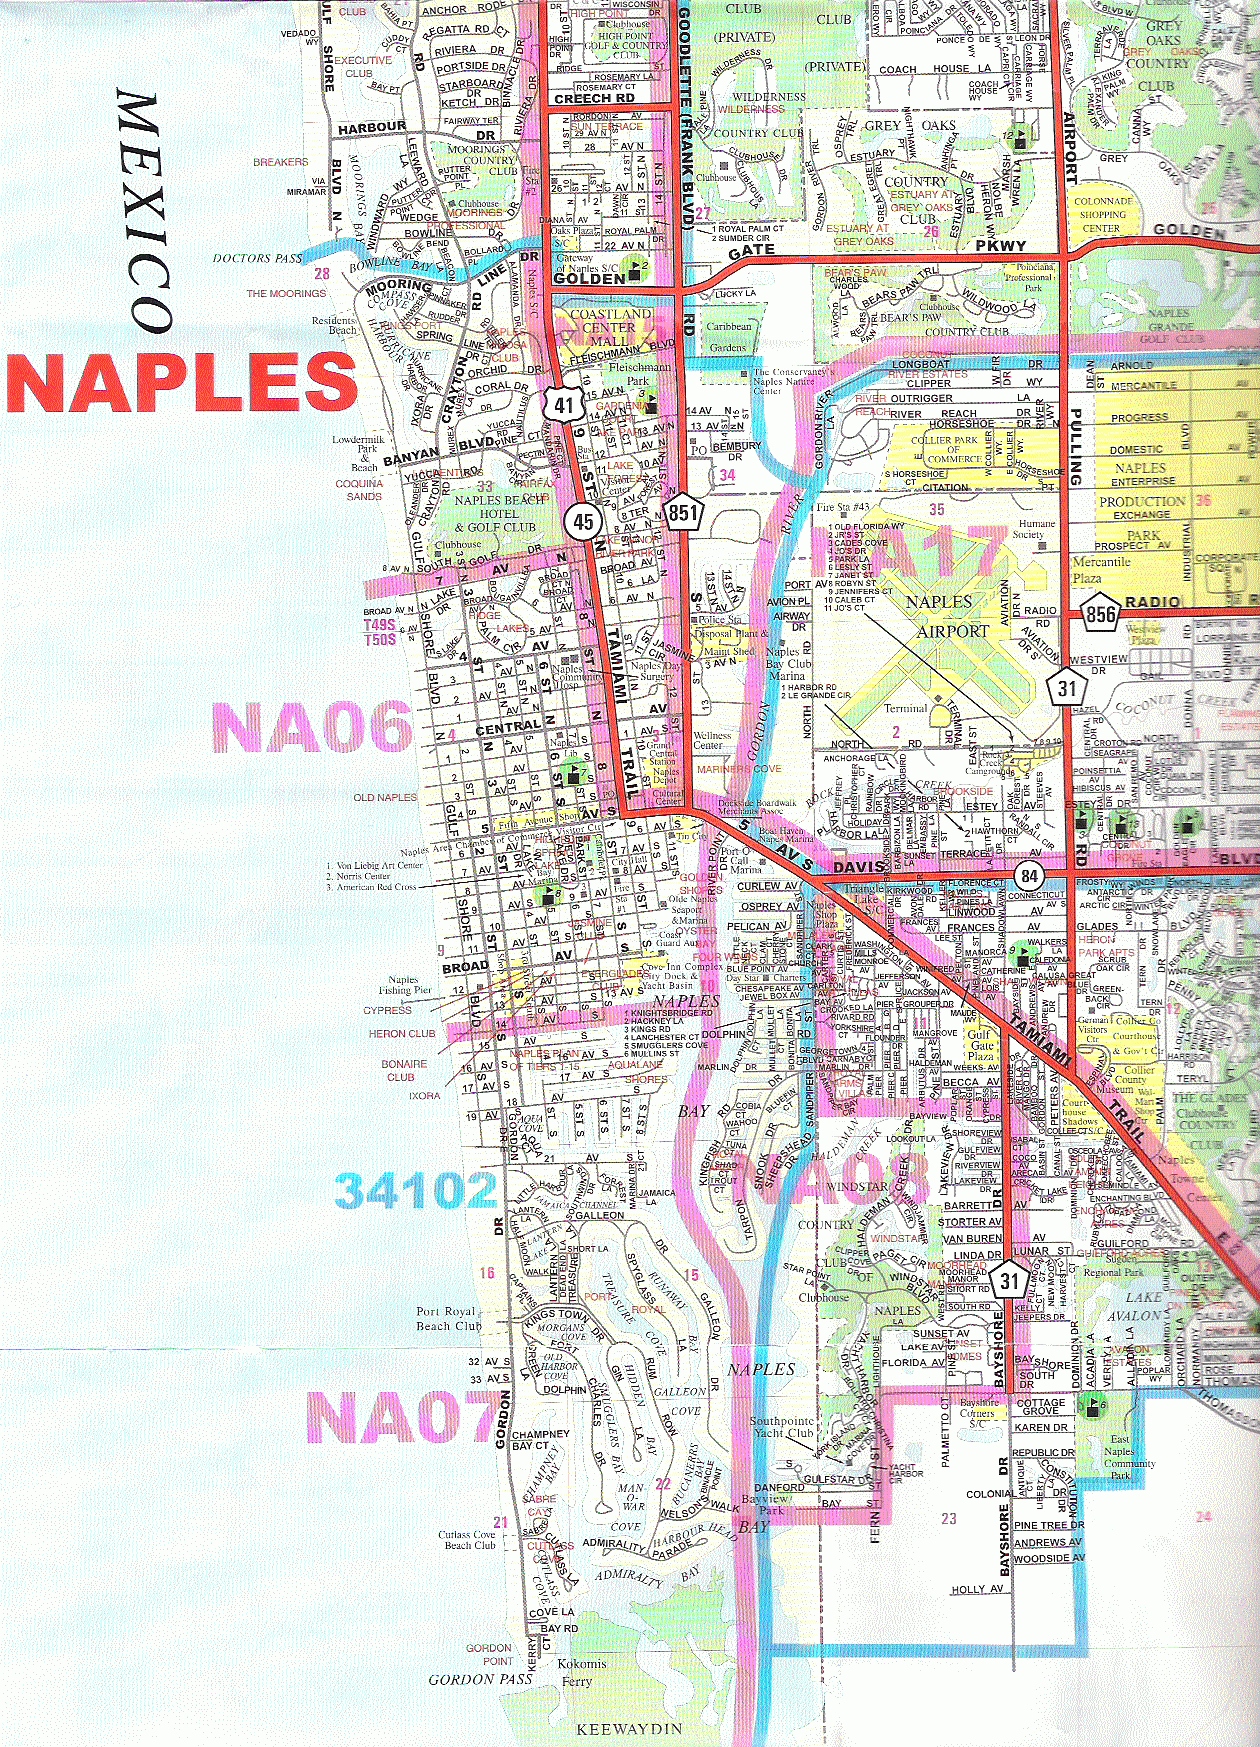 Naples Florida Map From Storage 6 - Ameliabd - Naples In Florida Map